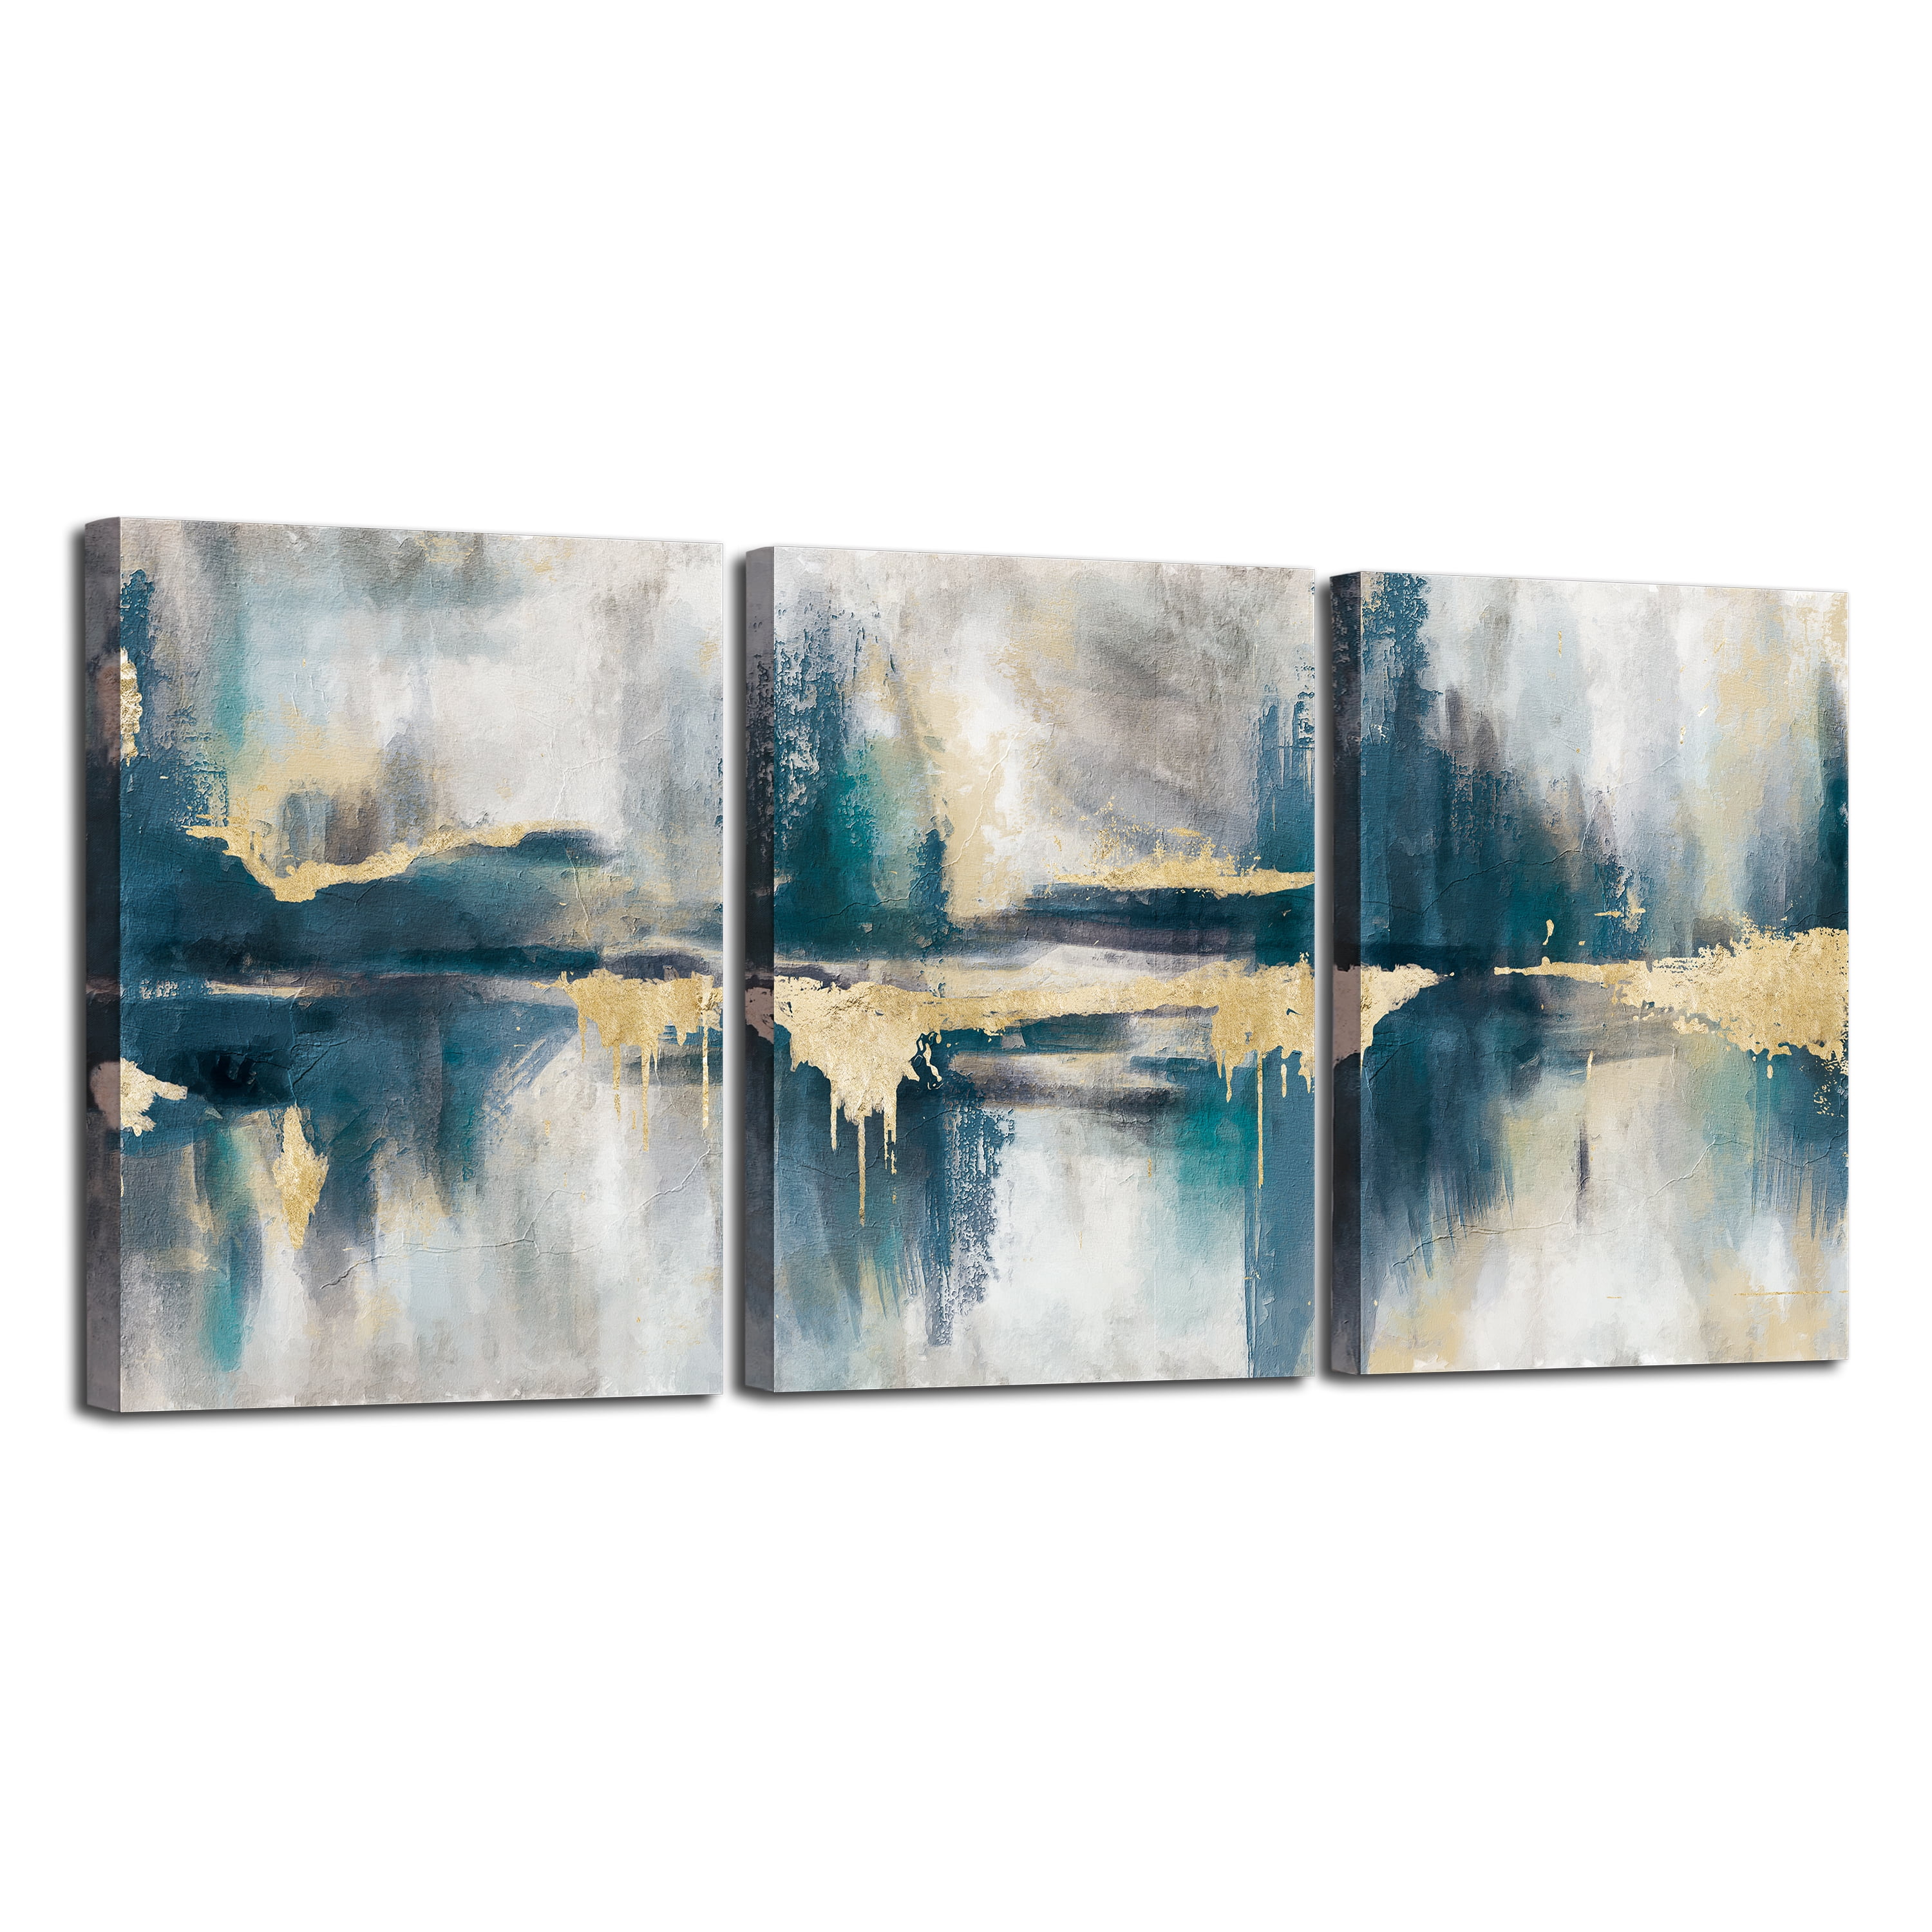 ArtbyHannah Pieces 12x16 inch Modern Abstract Wall Art Decor, Blue Canvas  Wall Print Set with Gold Foils for Living Room